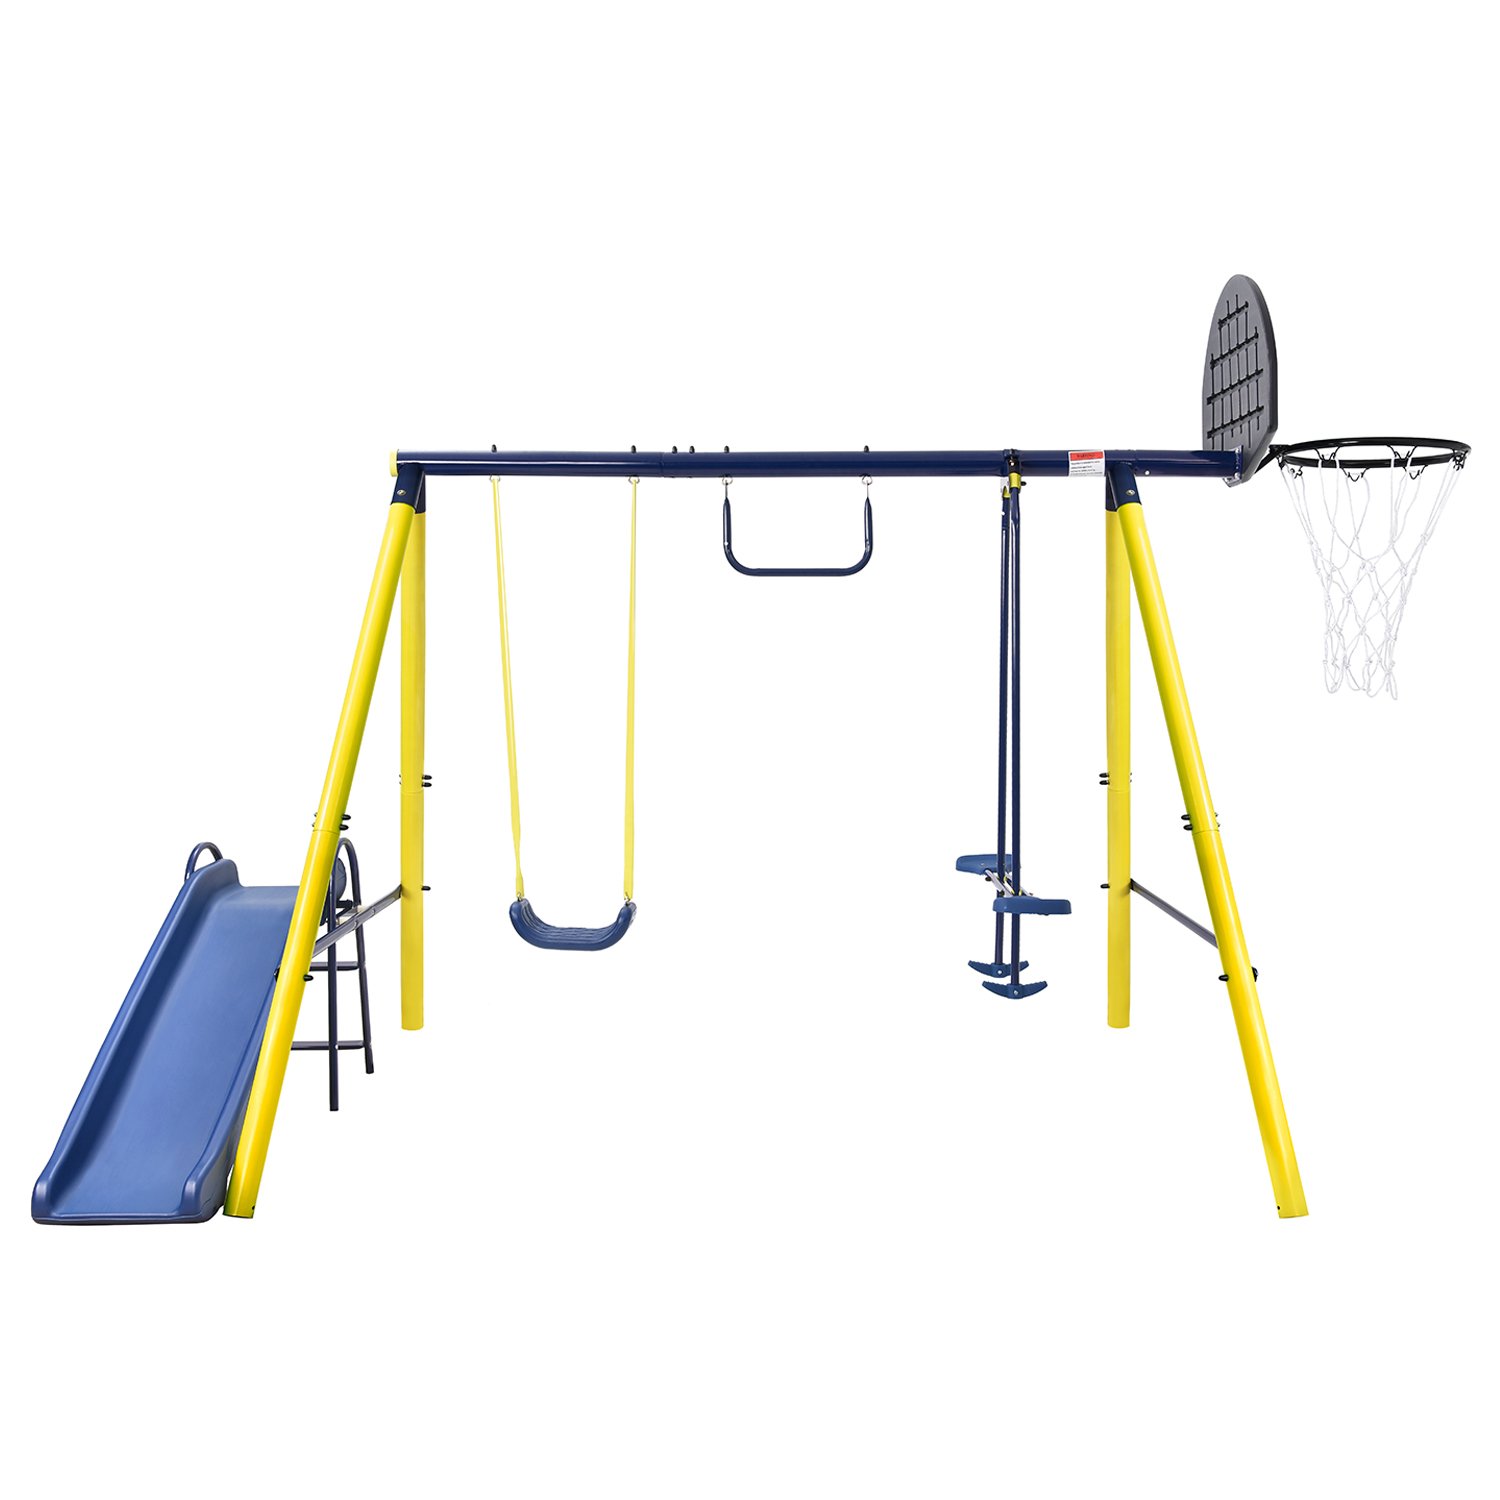 5 in 1 Outdoor Toddler Swing Set with Steel Frame-CASAINC